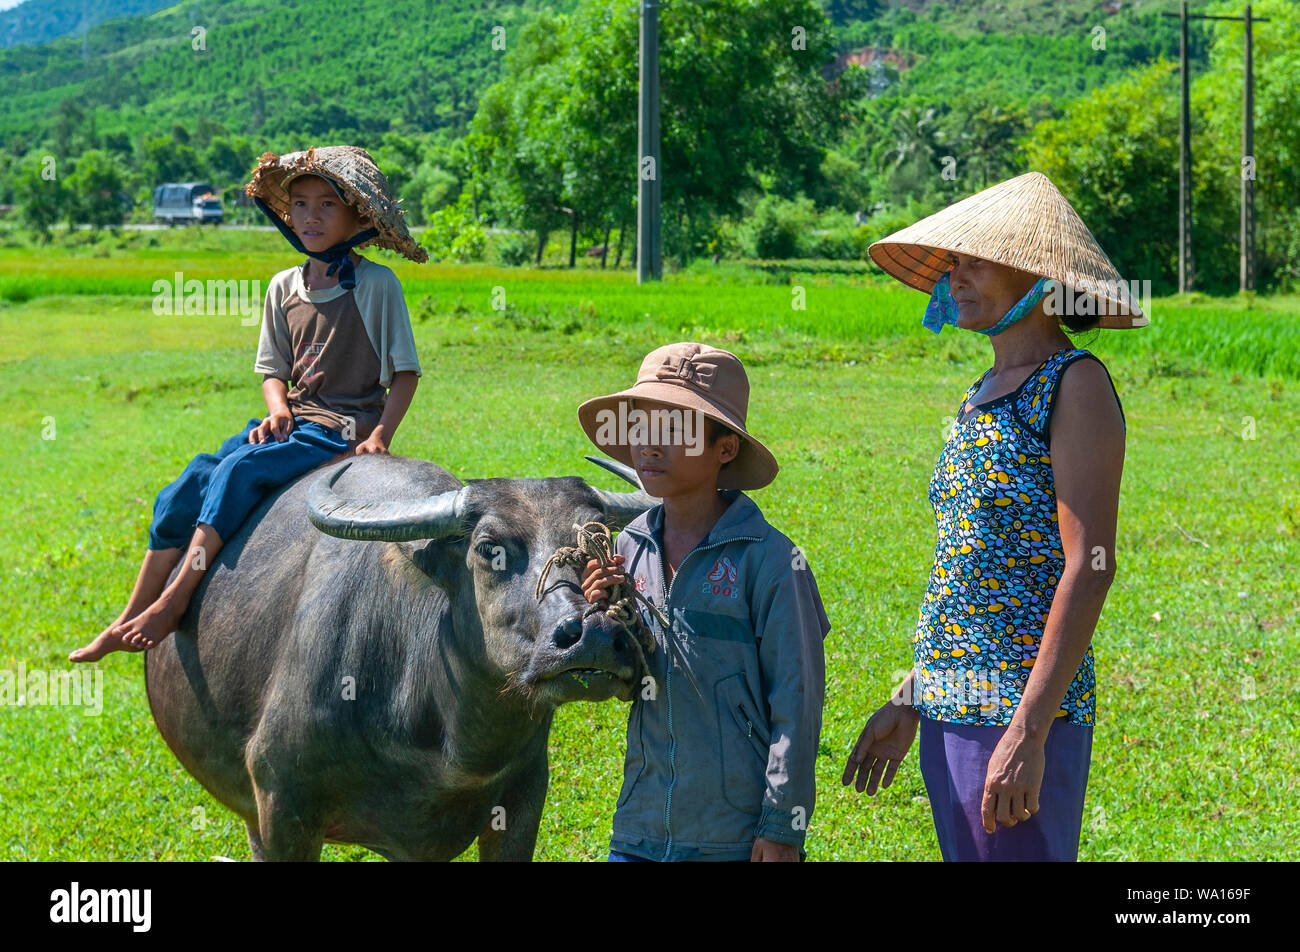 Rural life in central Vietnam on the road Hoi An to Hue with a woman, two children and a domestic water buffalo (Bubalus bubalis) in a rice paddy. Stock Photo